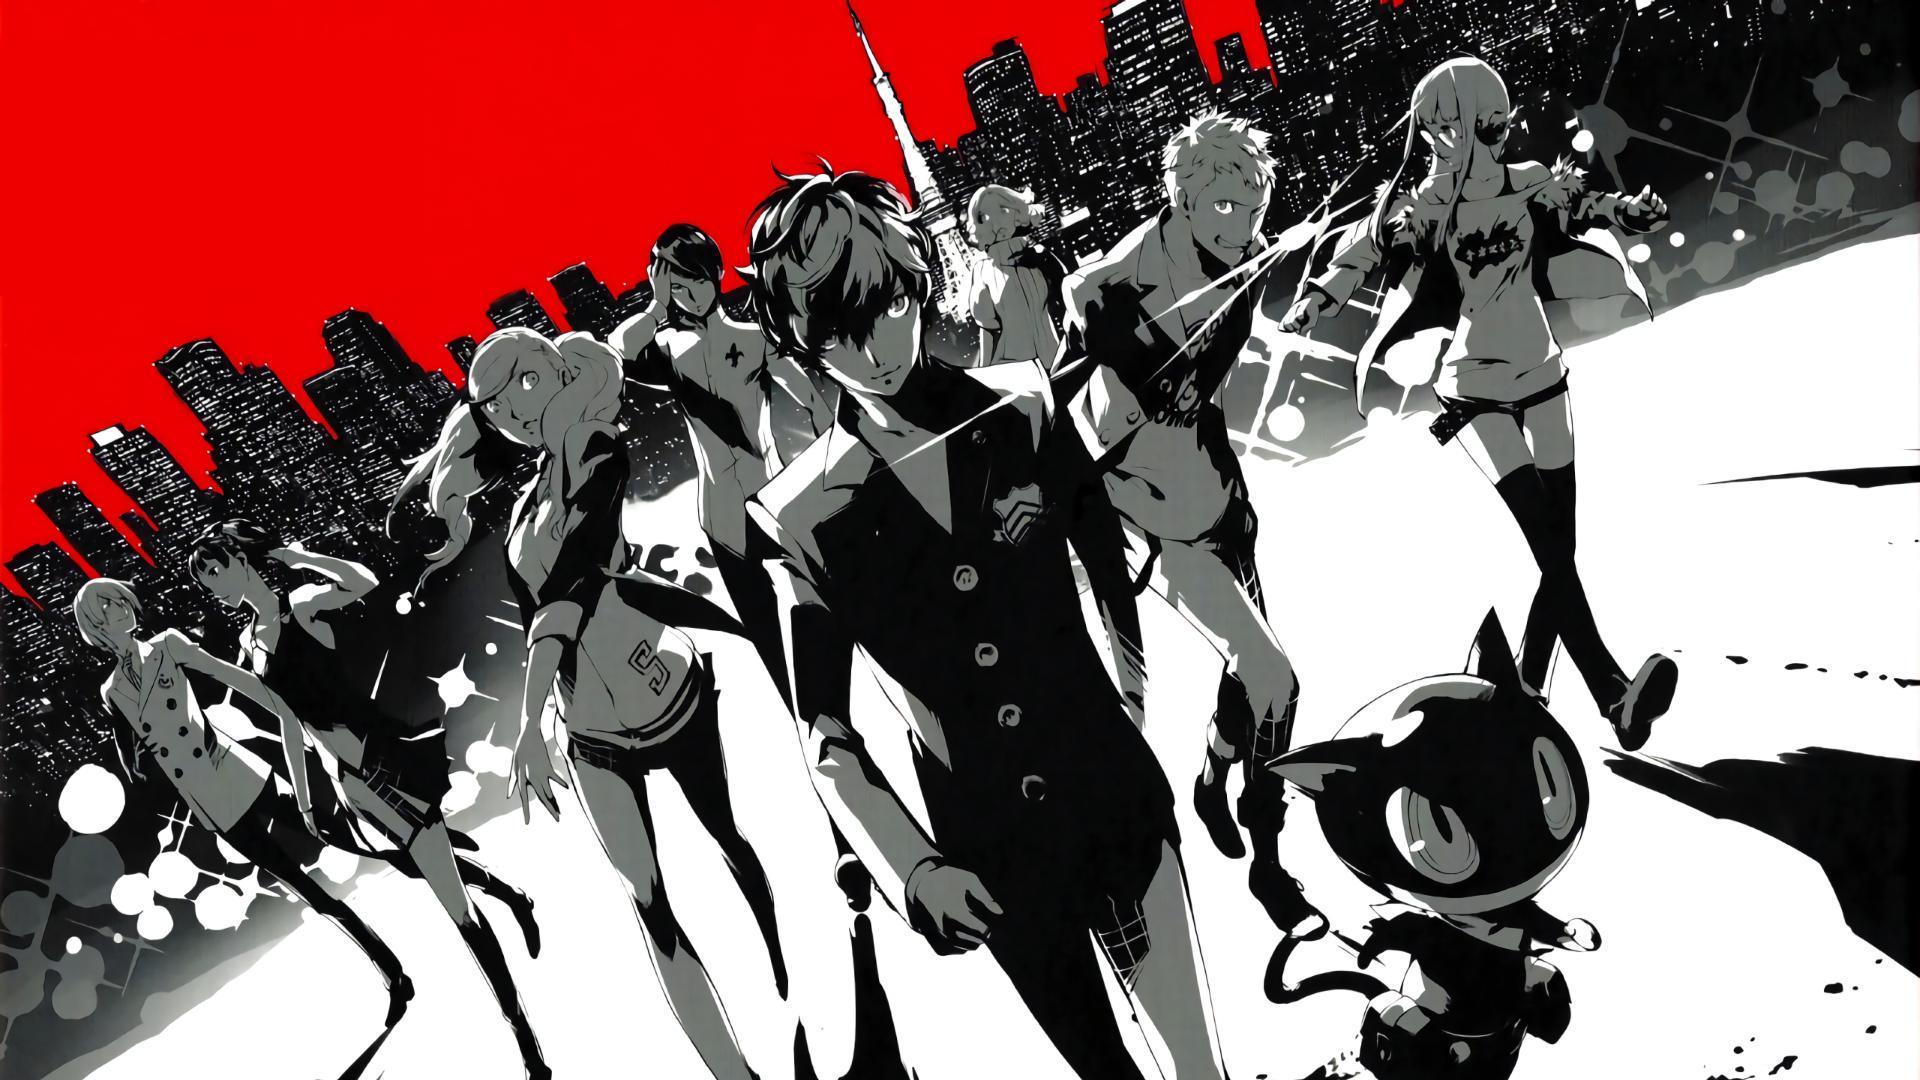 Persona 5 4k Wallpapers Top Free Persona 5 4k Backgrounds Images, Photos, Reviews